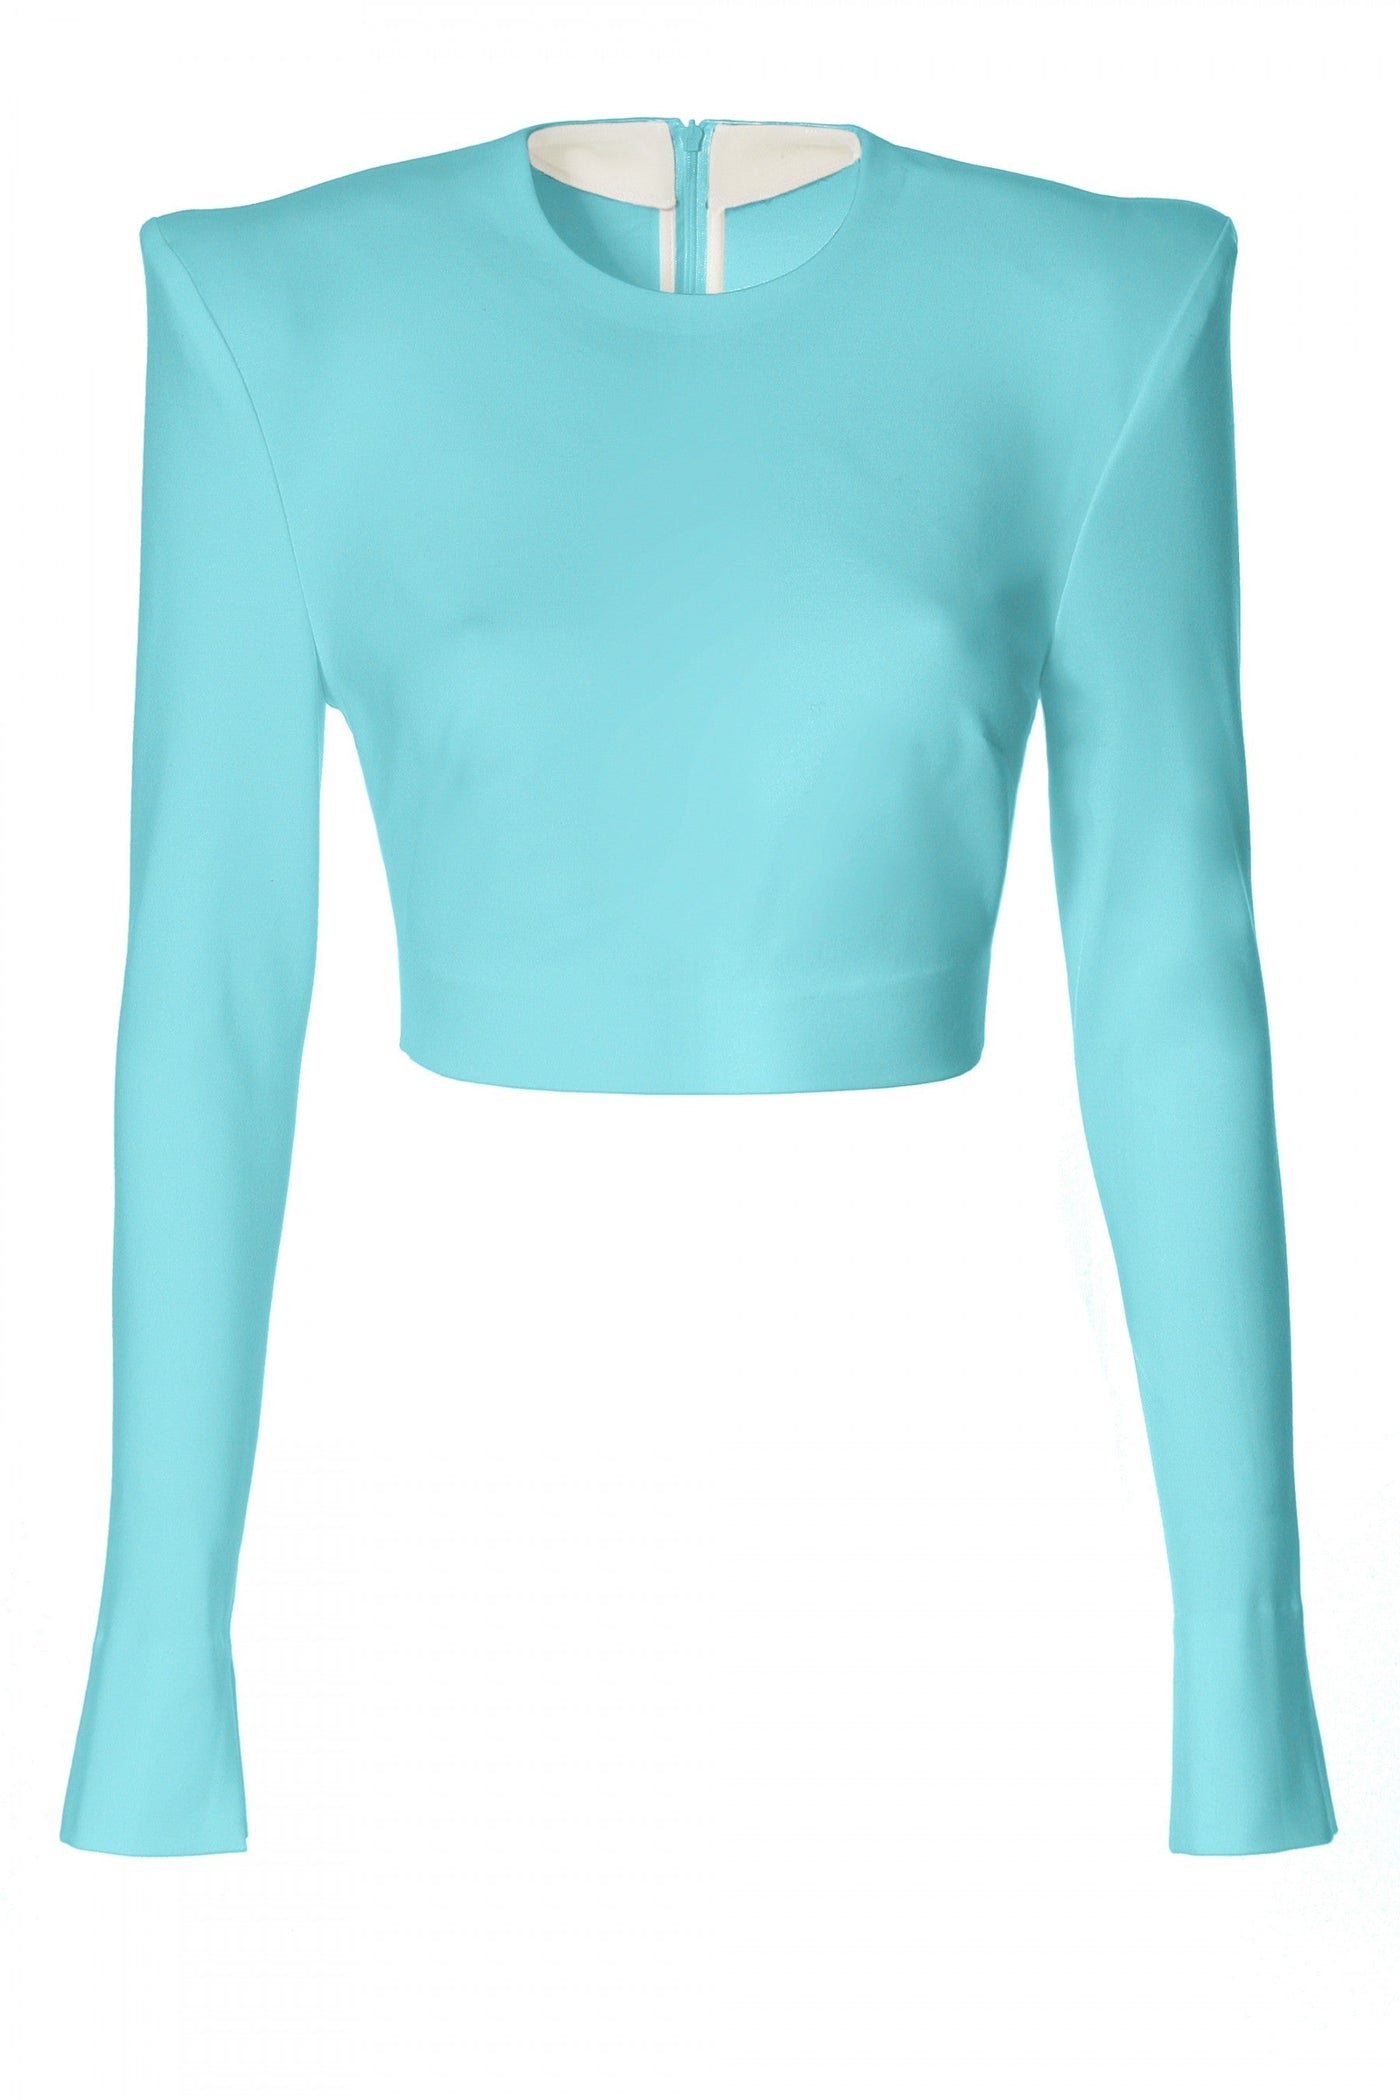 Zoey Blue Radiance Top